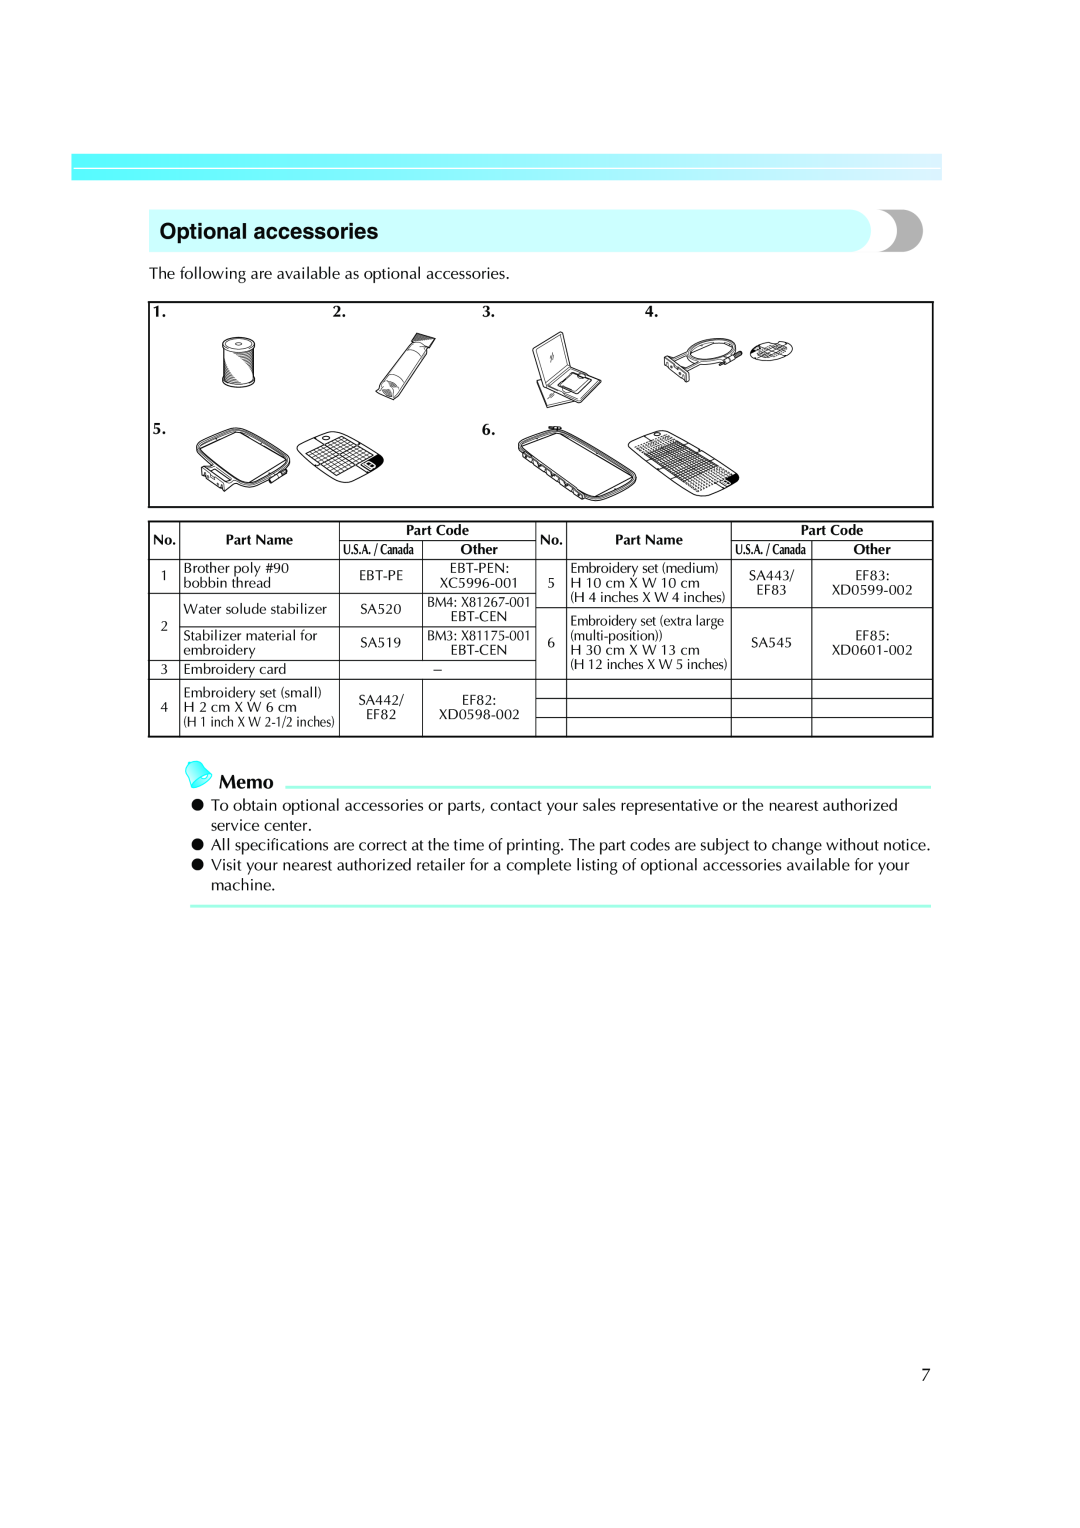 Brother Computerized Embroidery Machine operation manual Optional accessories, Memo 